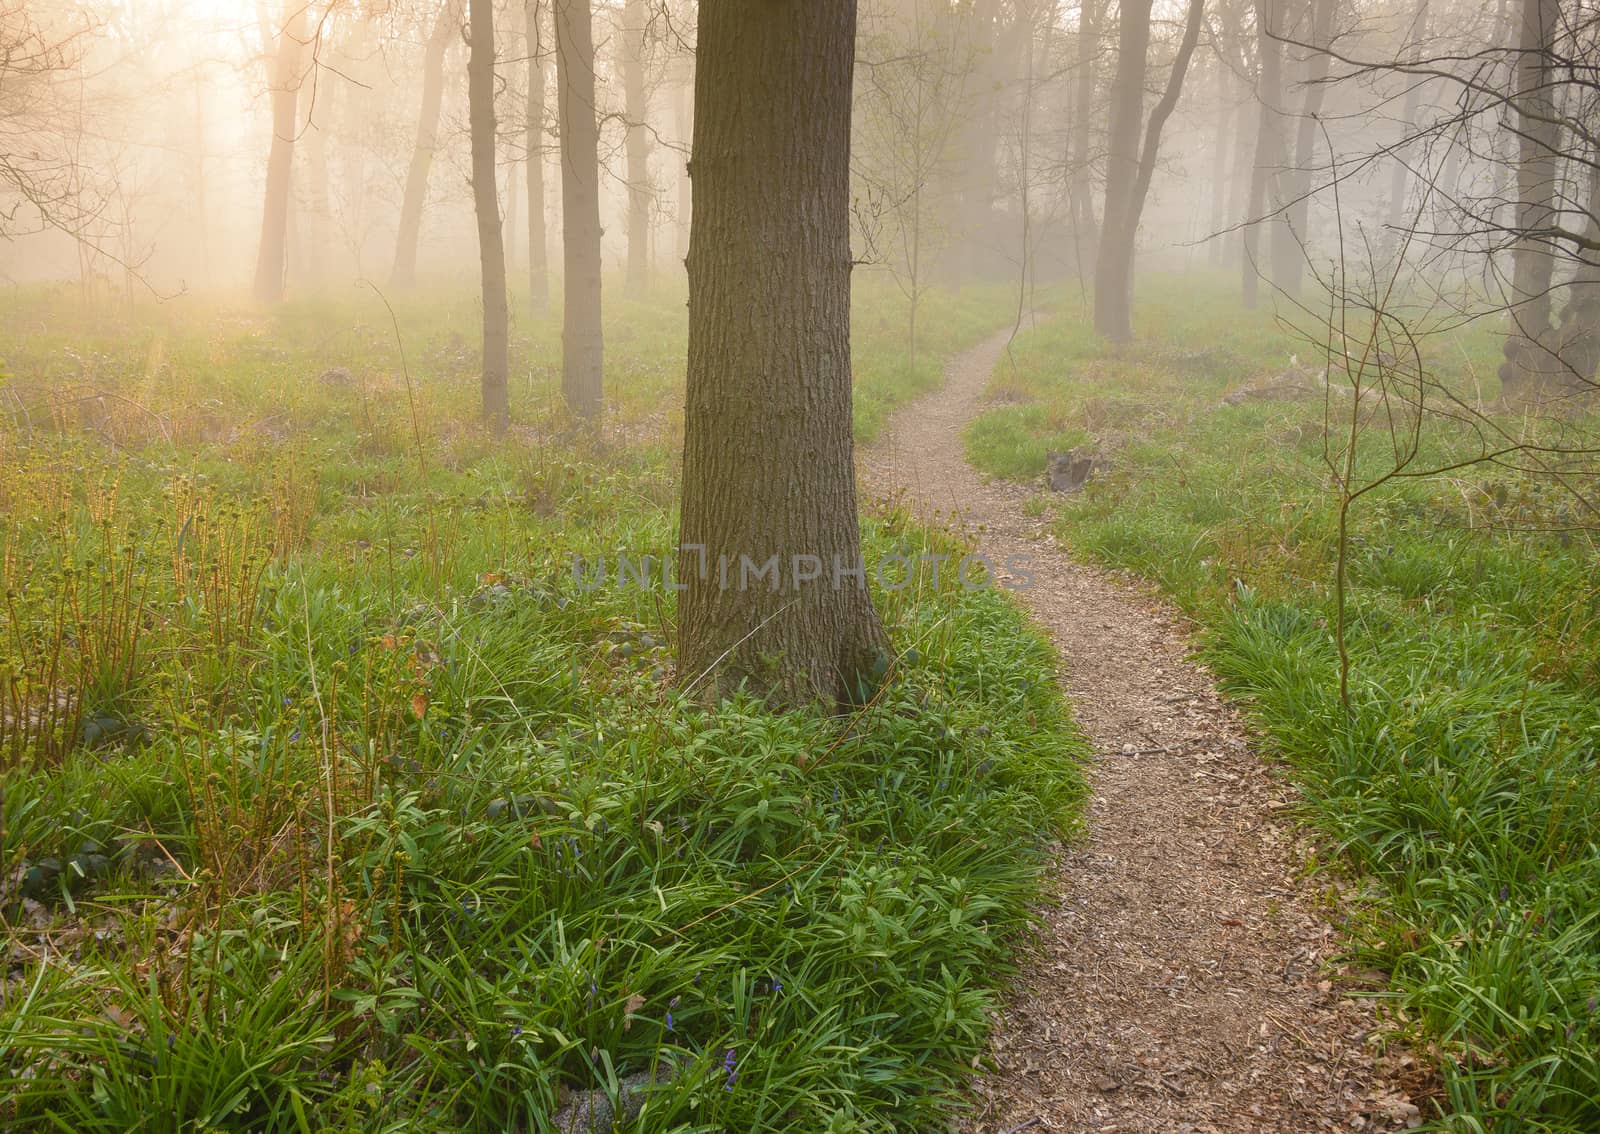 Sunrise over a path into the forest by pljvv